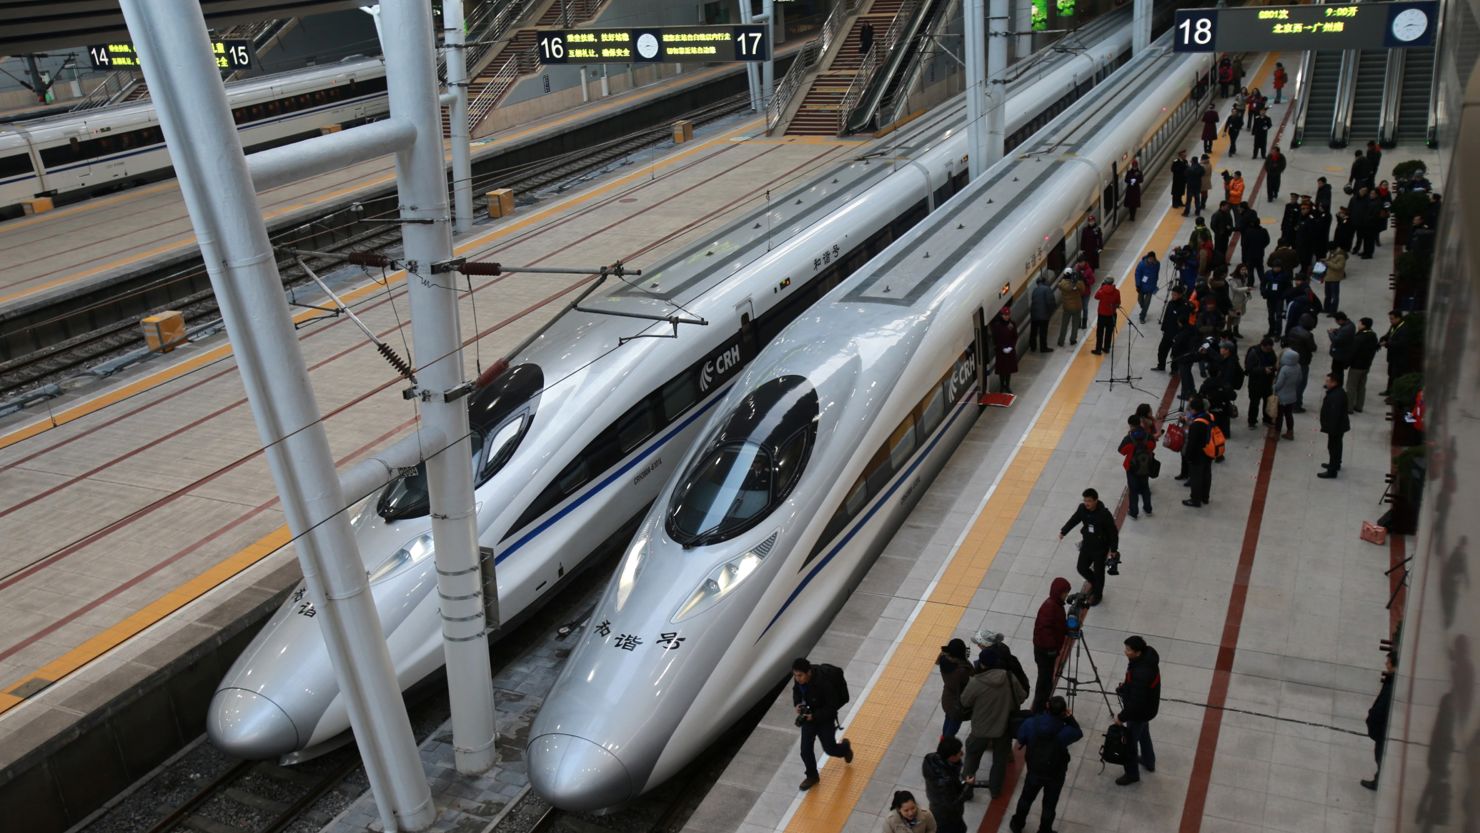 China has the world's largest high-speed rail network, which includes a 2,298-kilometer line linking Beijing and Guangzhou. 